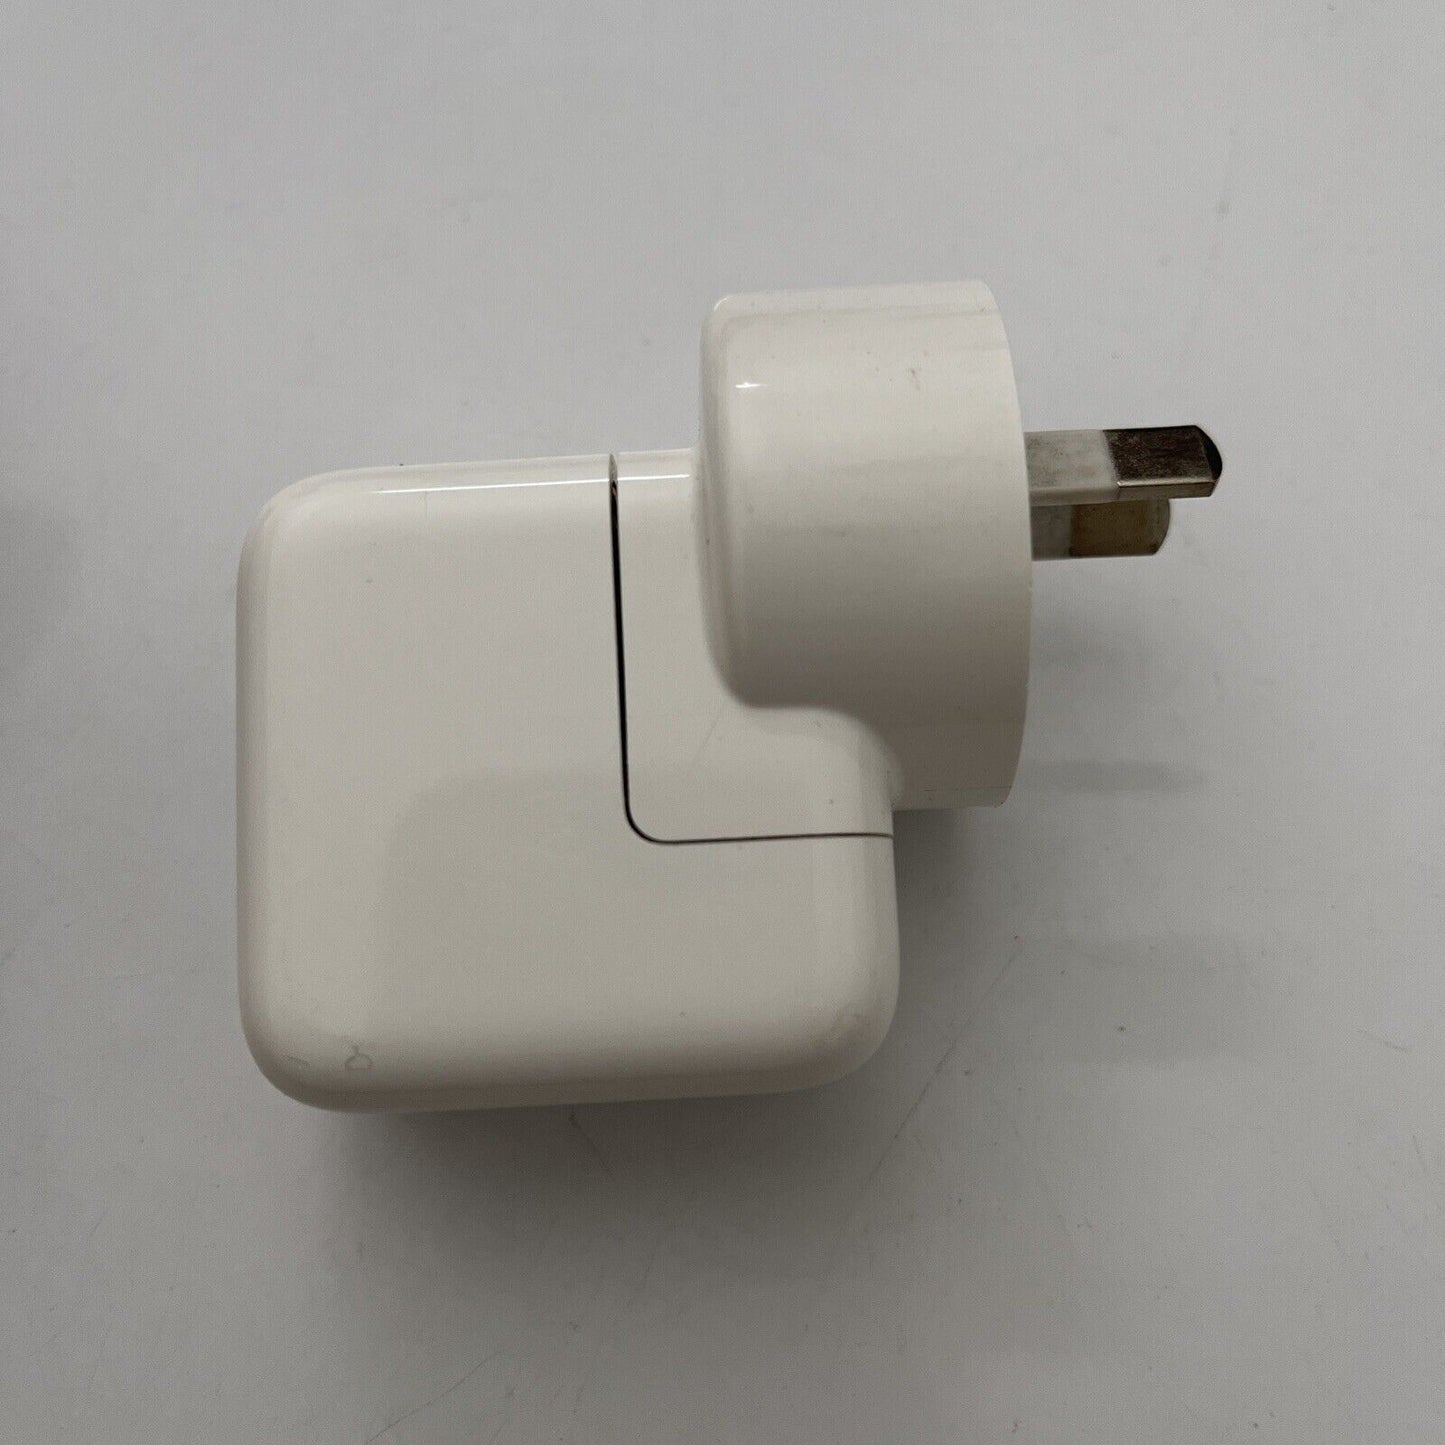 Genuine Apple 12W USB Charger Adapter A1401 Power Supply